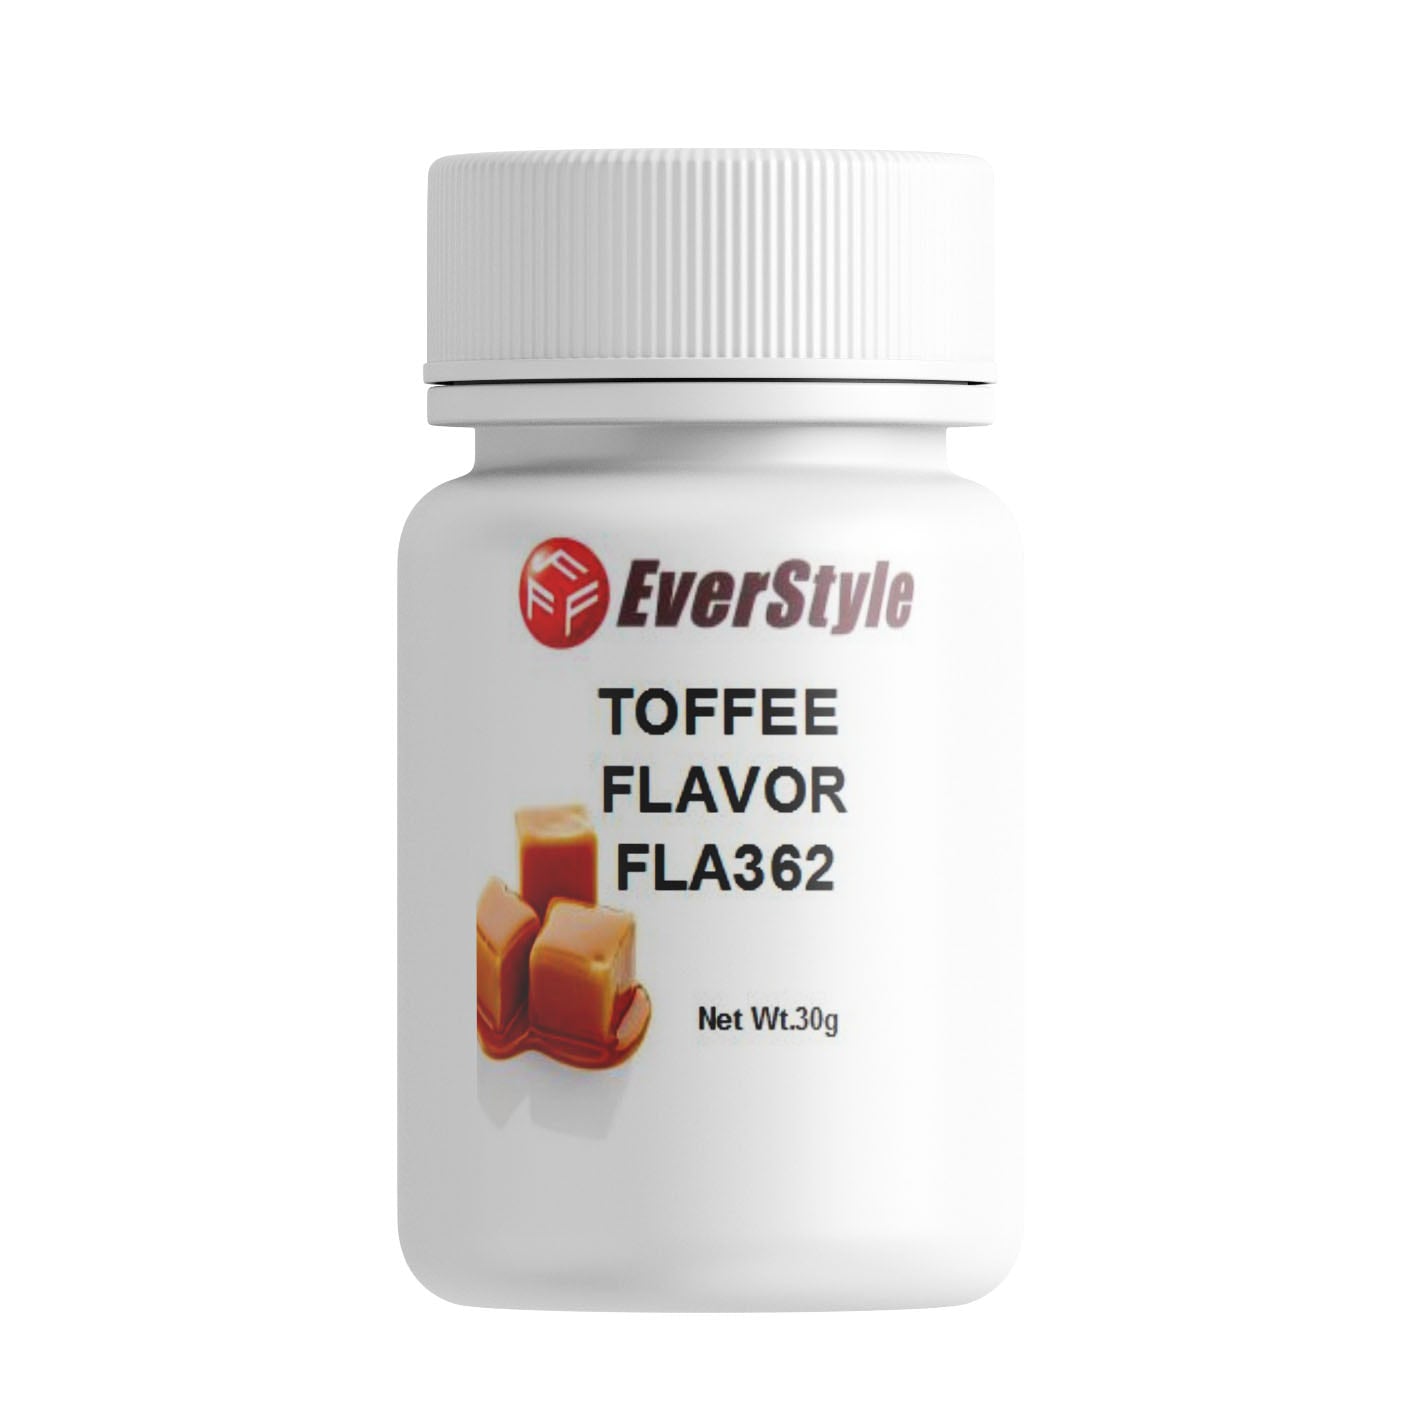 Everstyle Toffee Flavor 30g (FLA362)